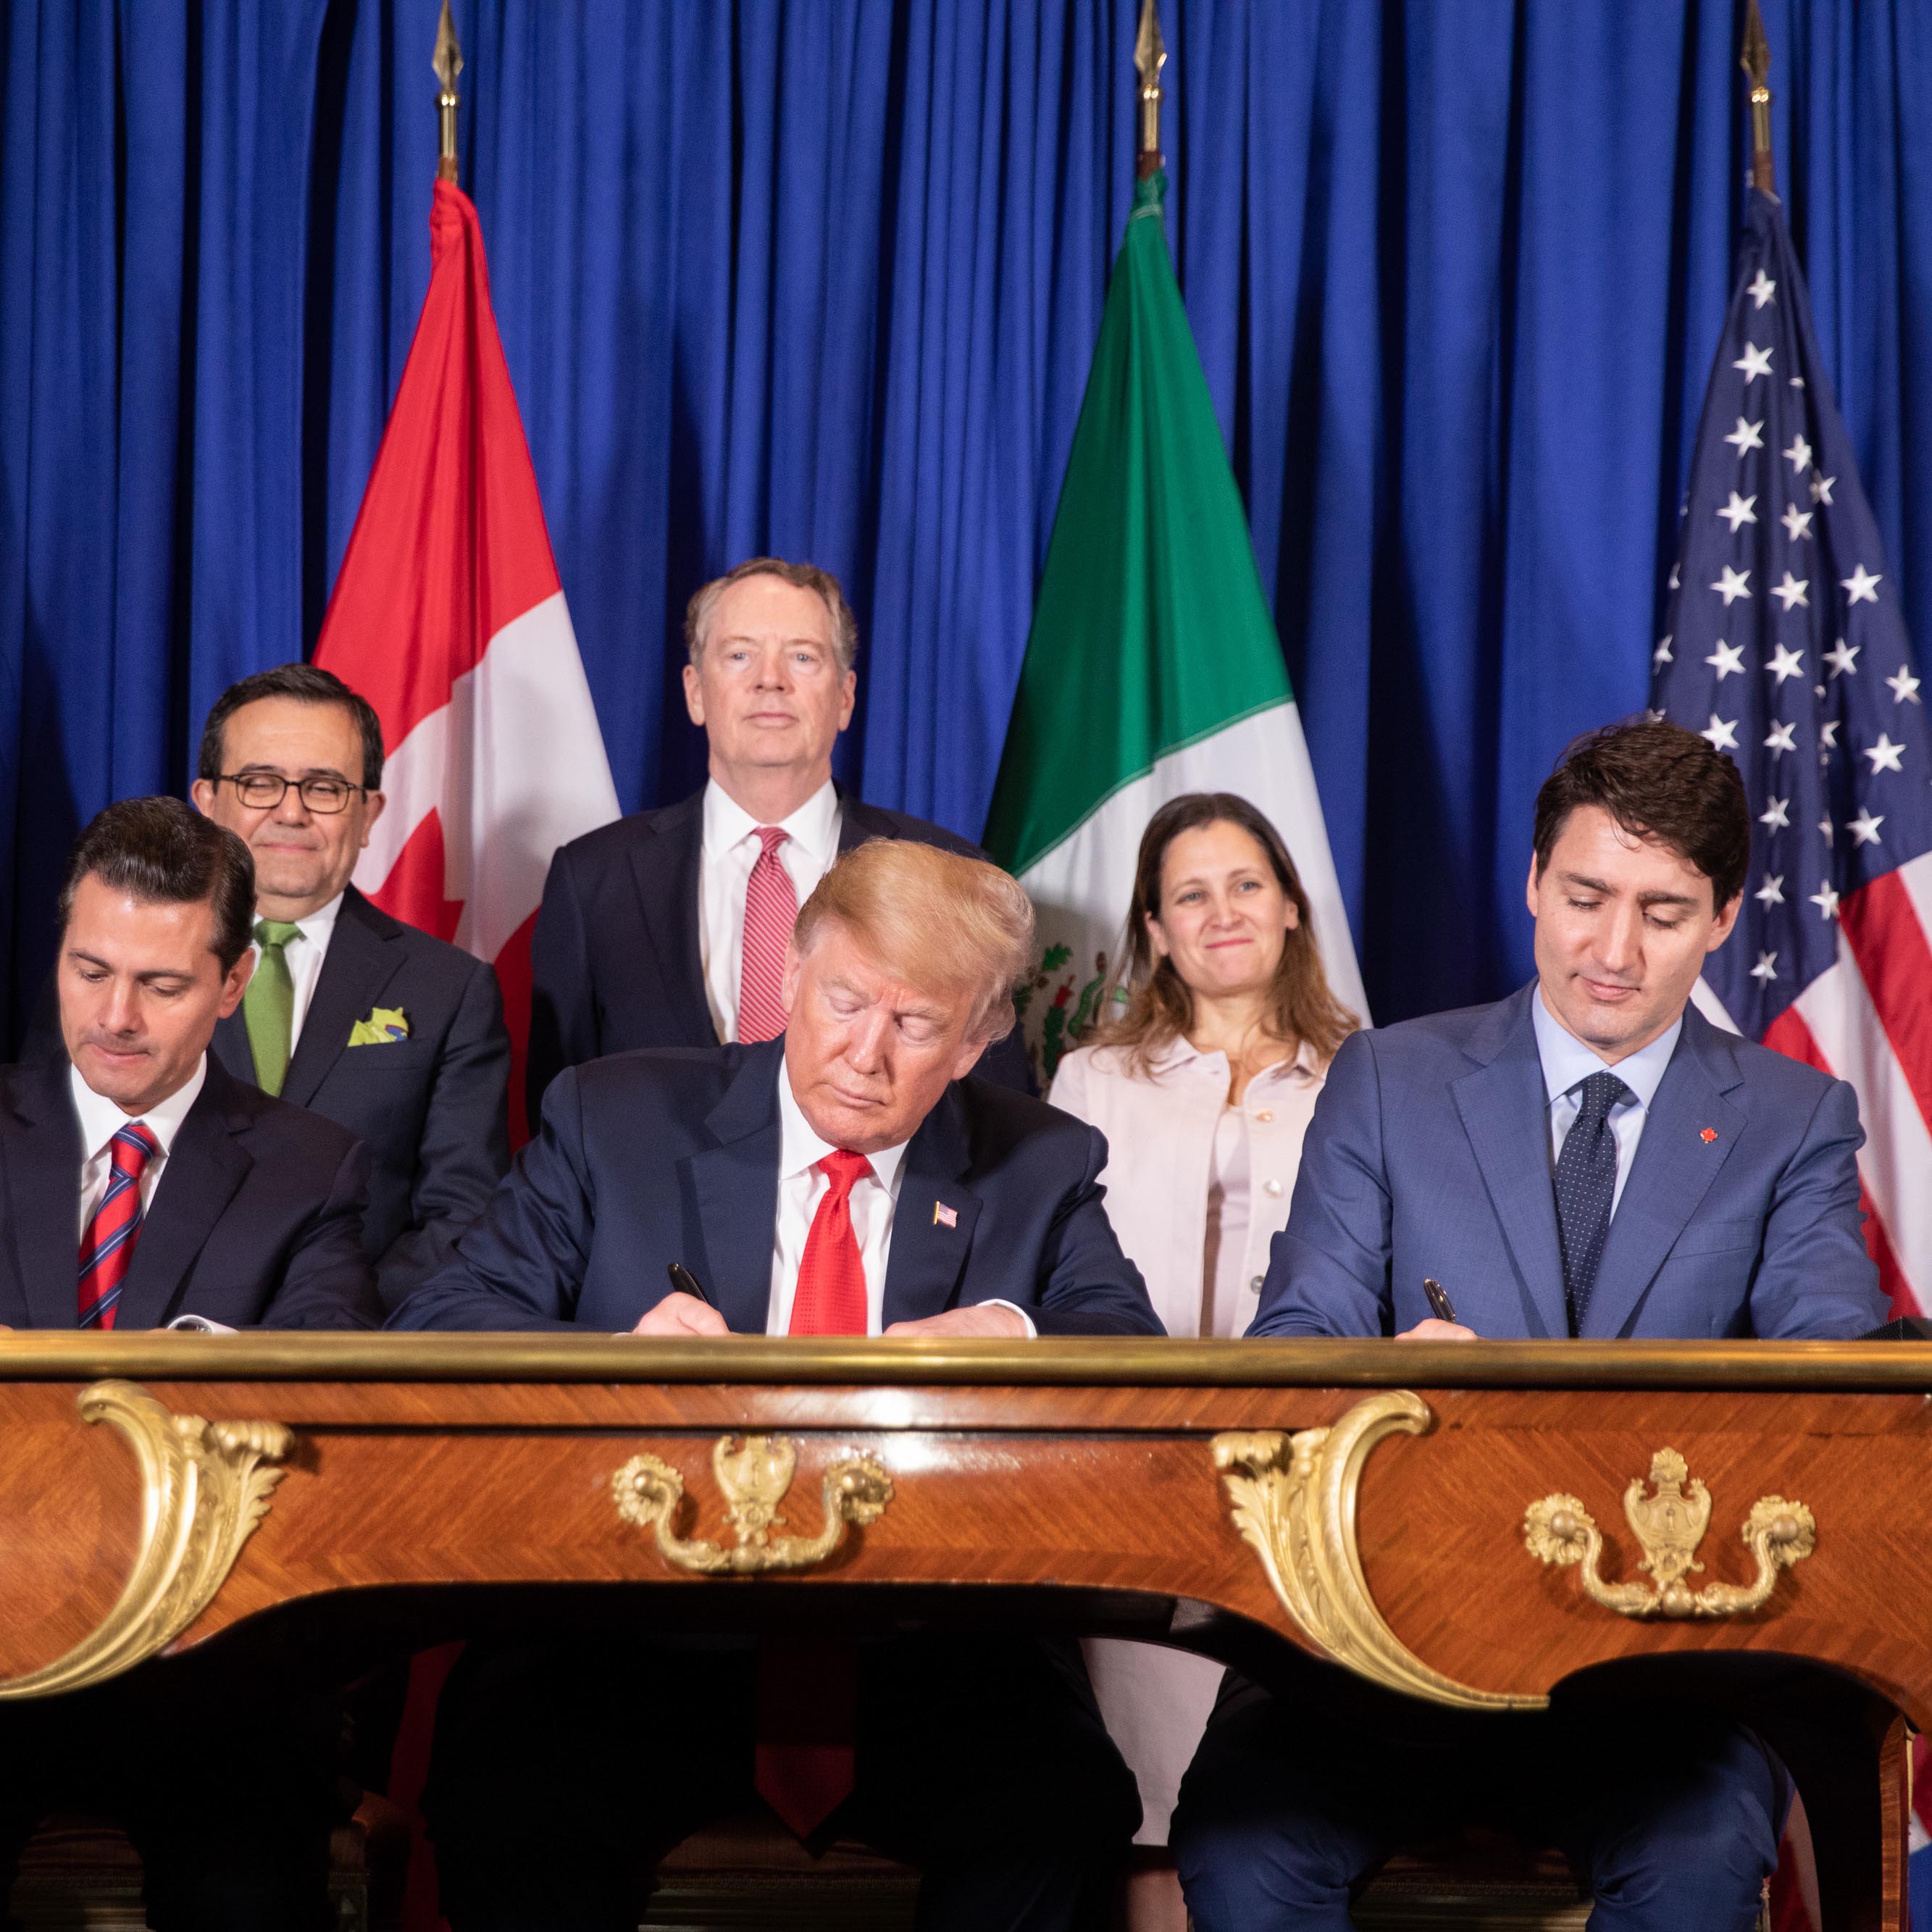 US Trade Ambassador Robert Lighthizer Announces US, Mexico and Canada Have Finalized USMCA- House Democrats Signal Support